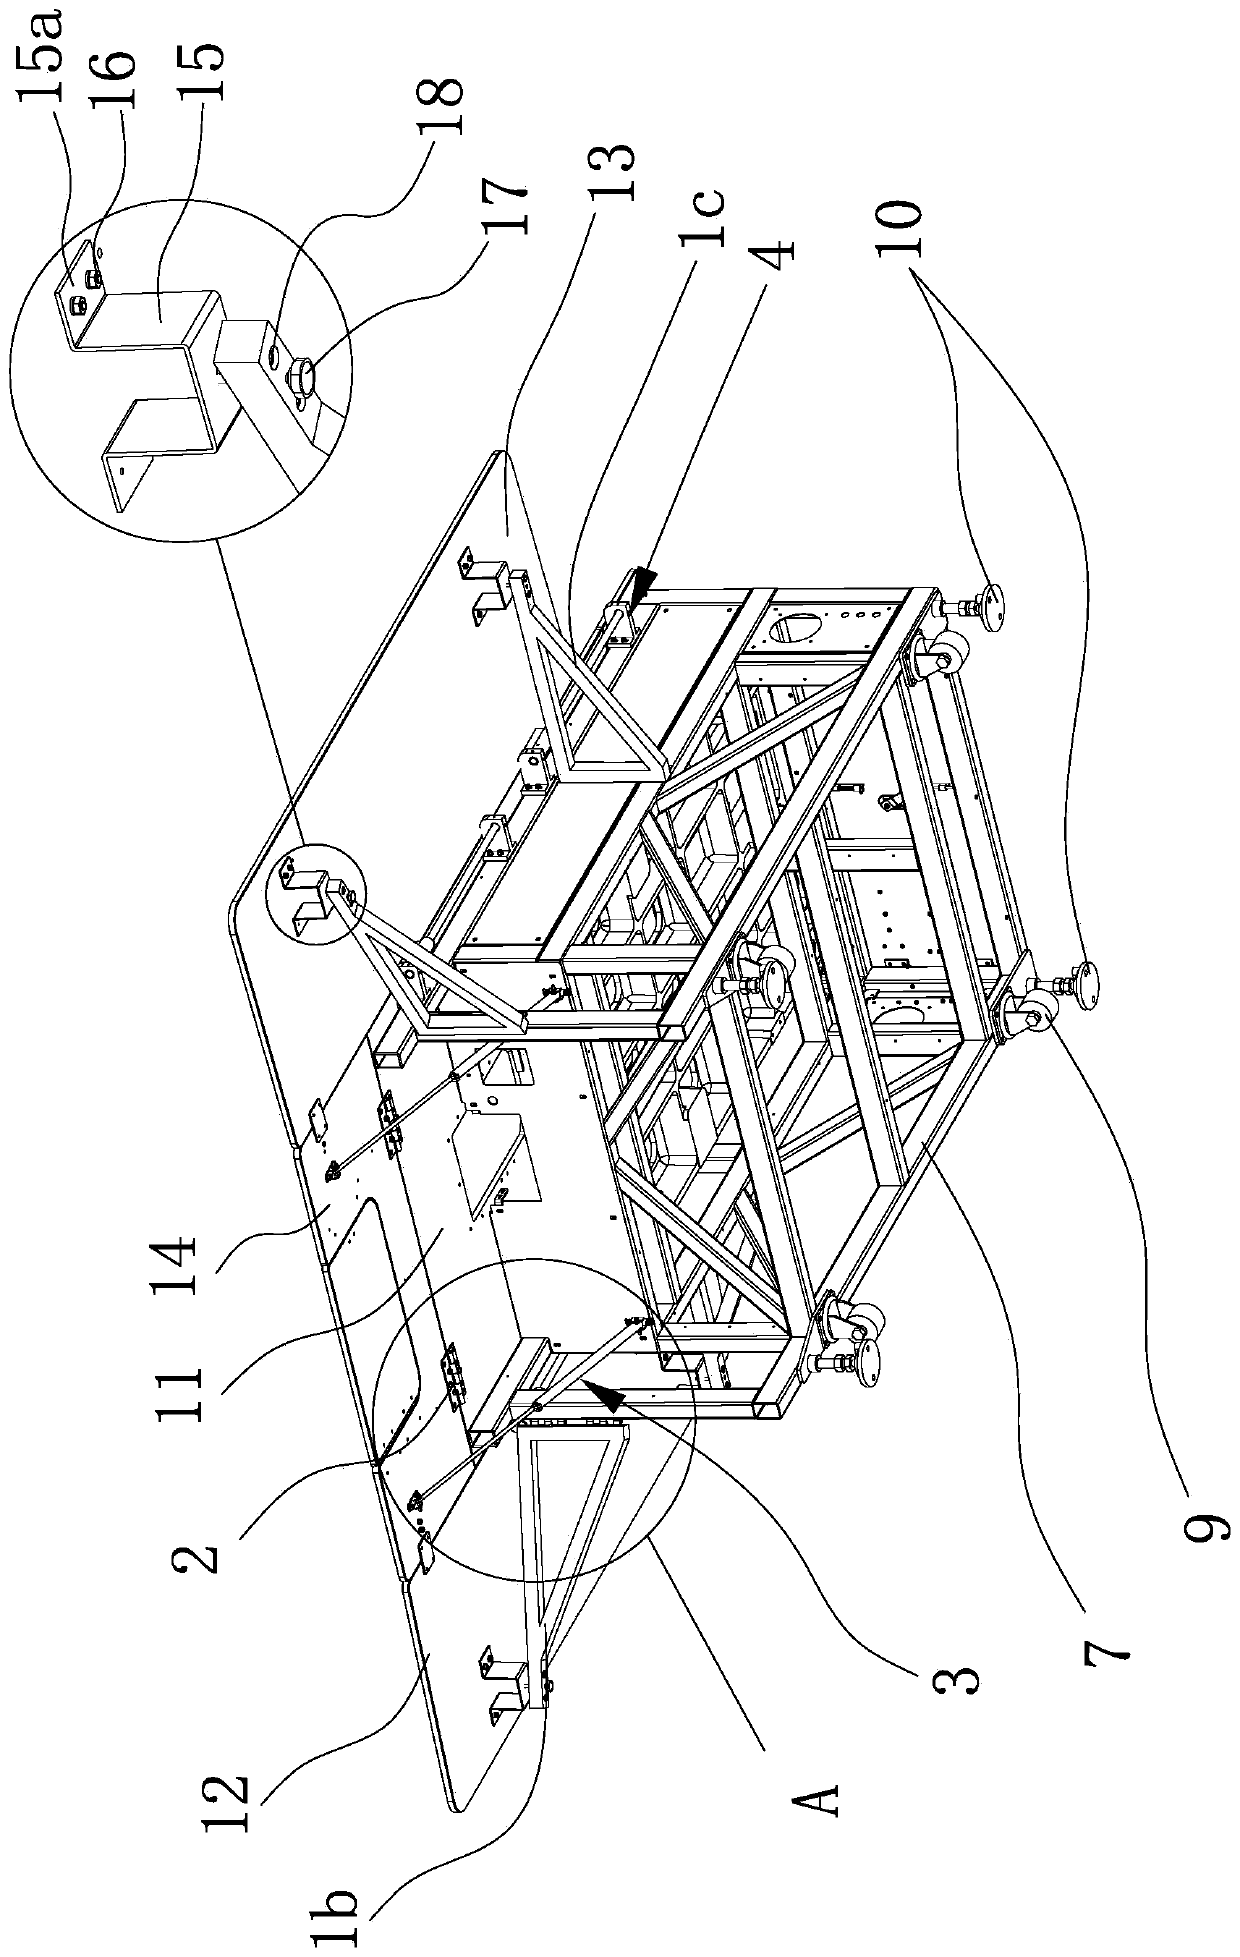 Folding table top structure of sewing machine